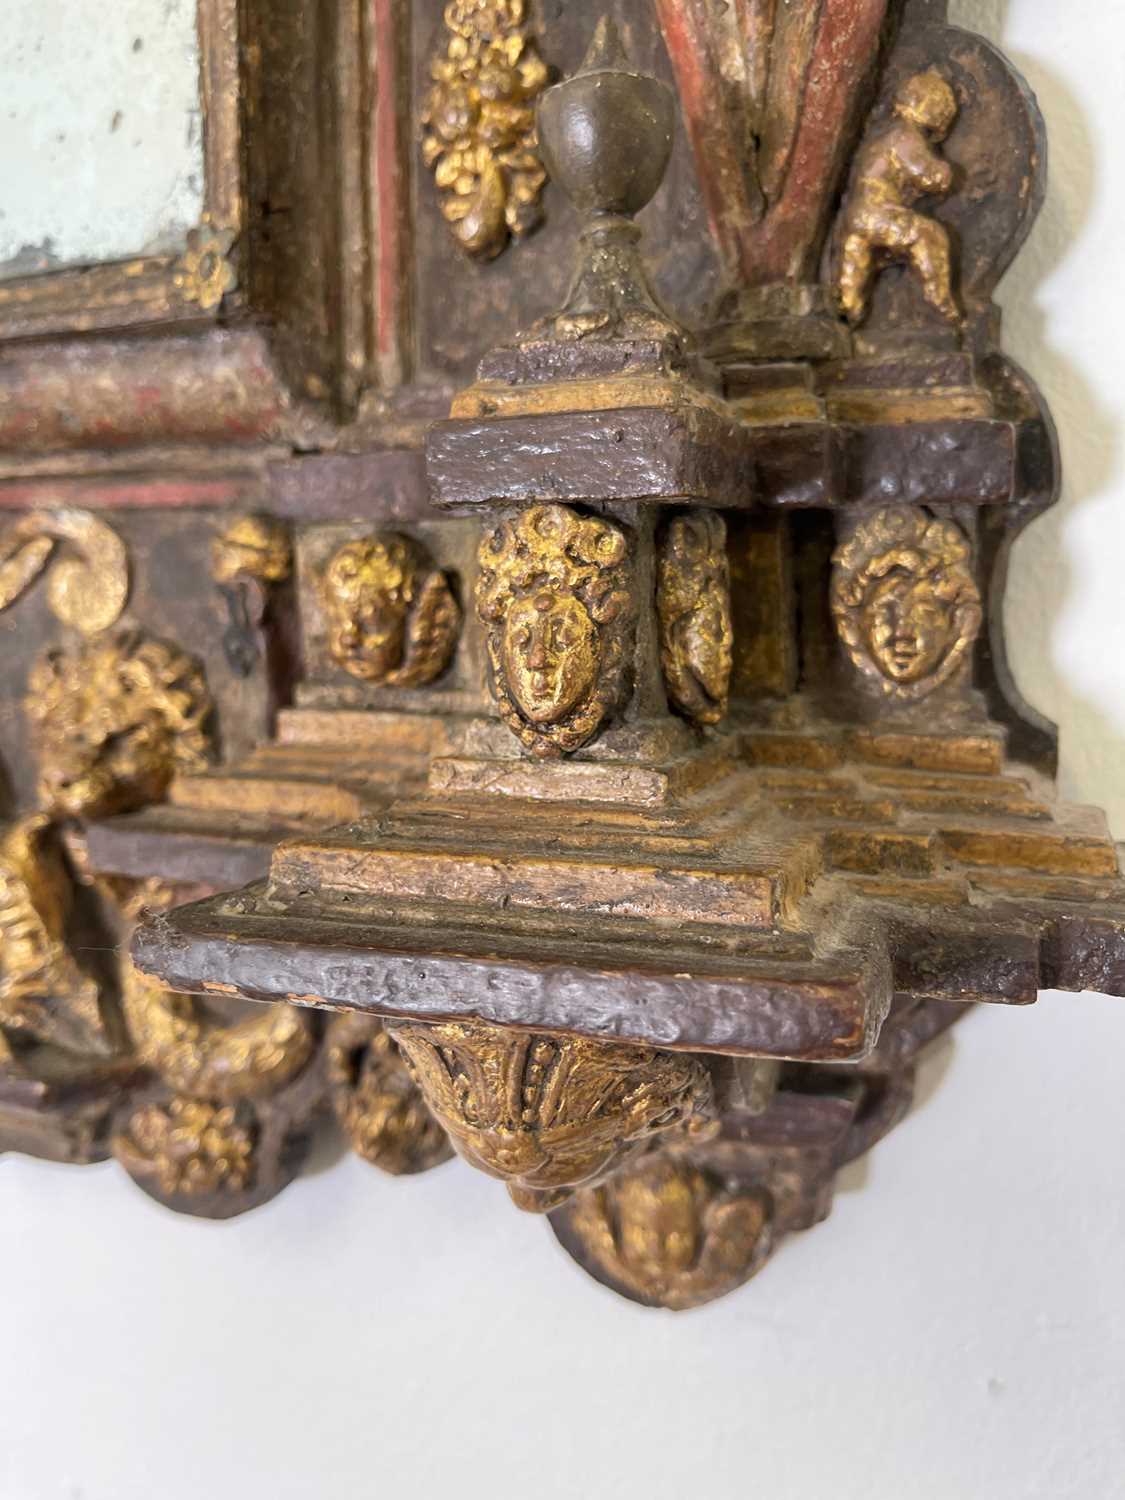 A Renaissance-style painted and parcel-gilt tabernacle mirror, - Image 30 of 69